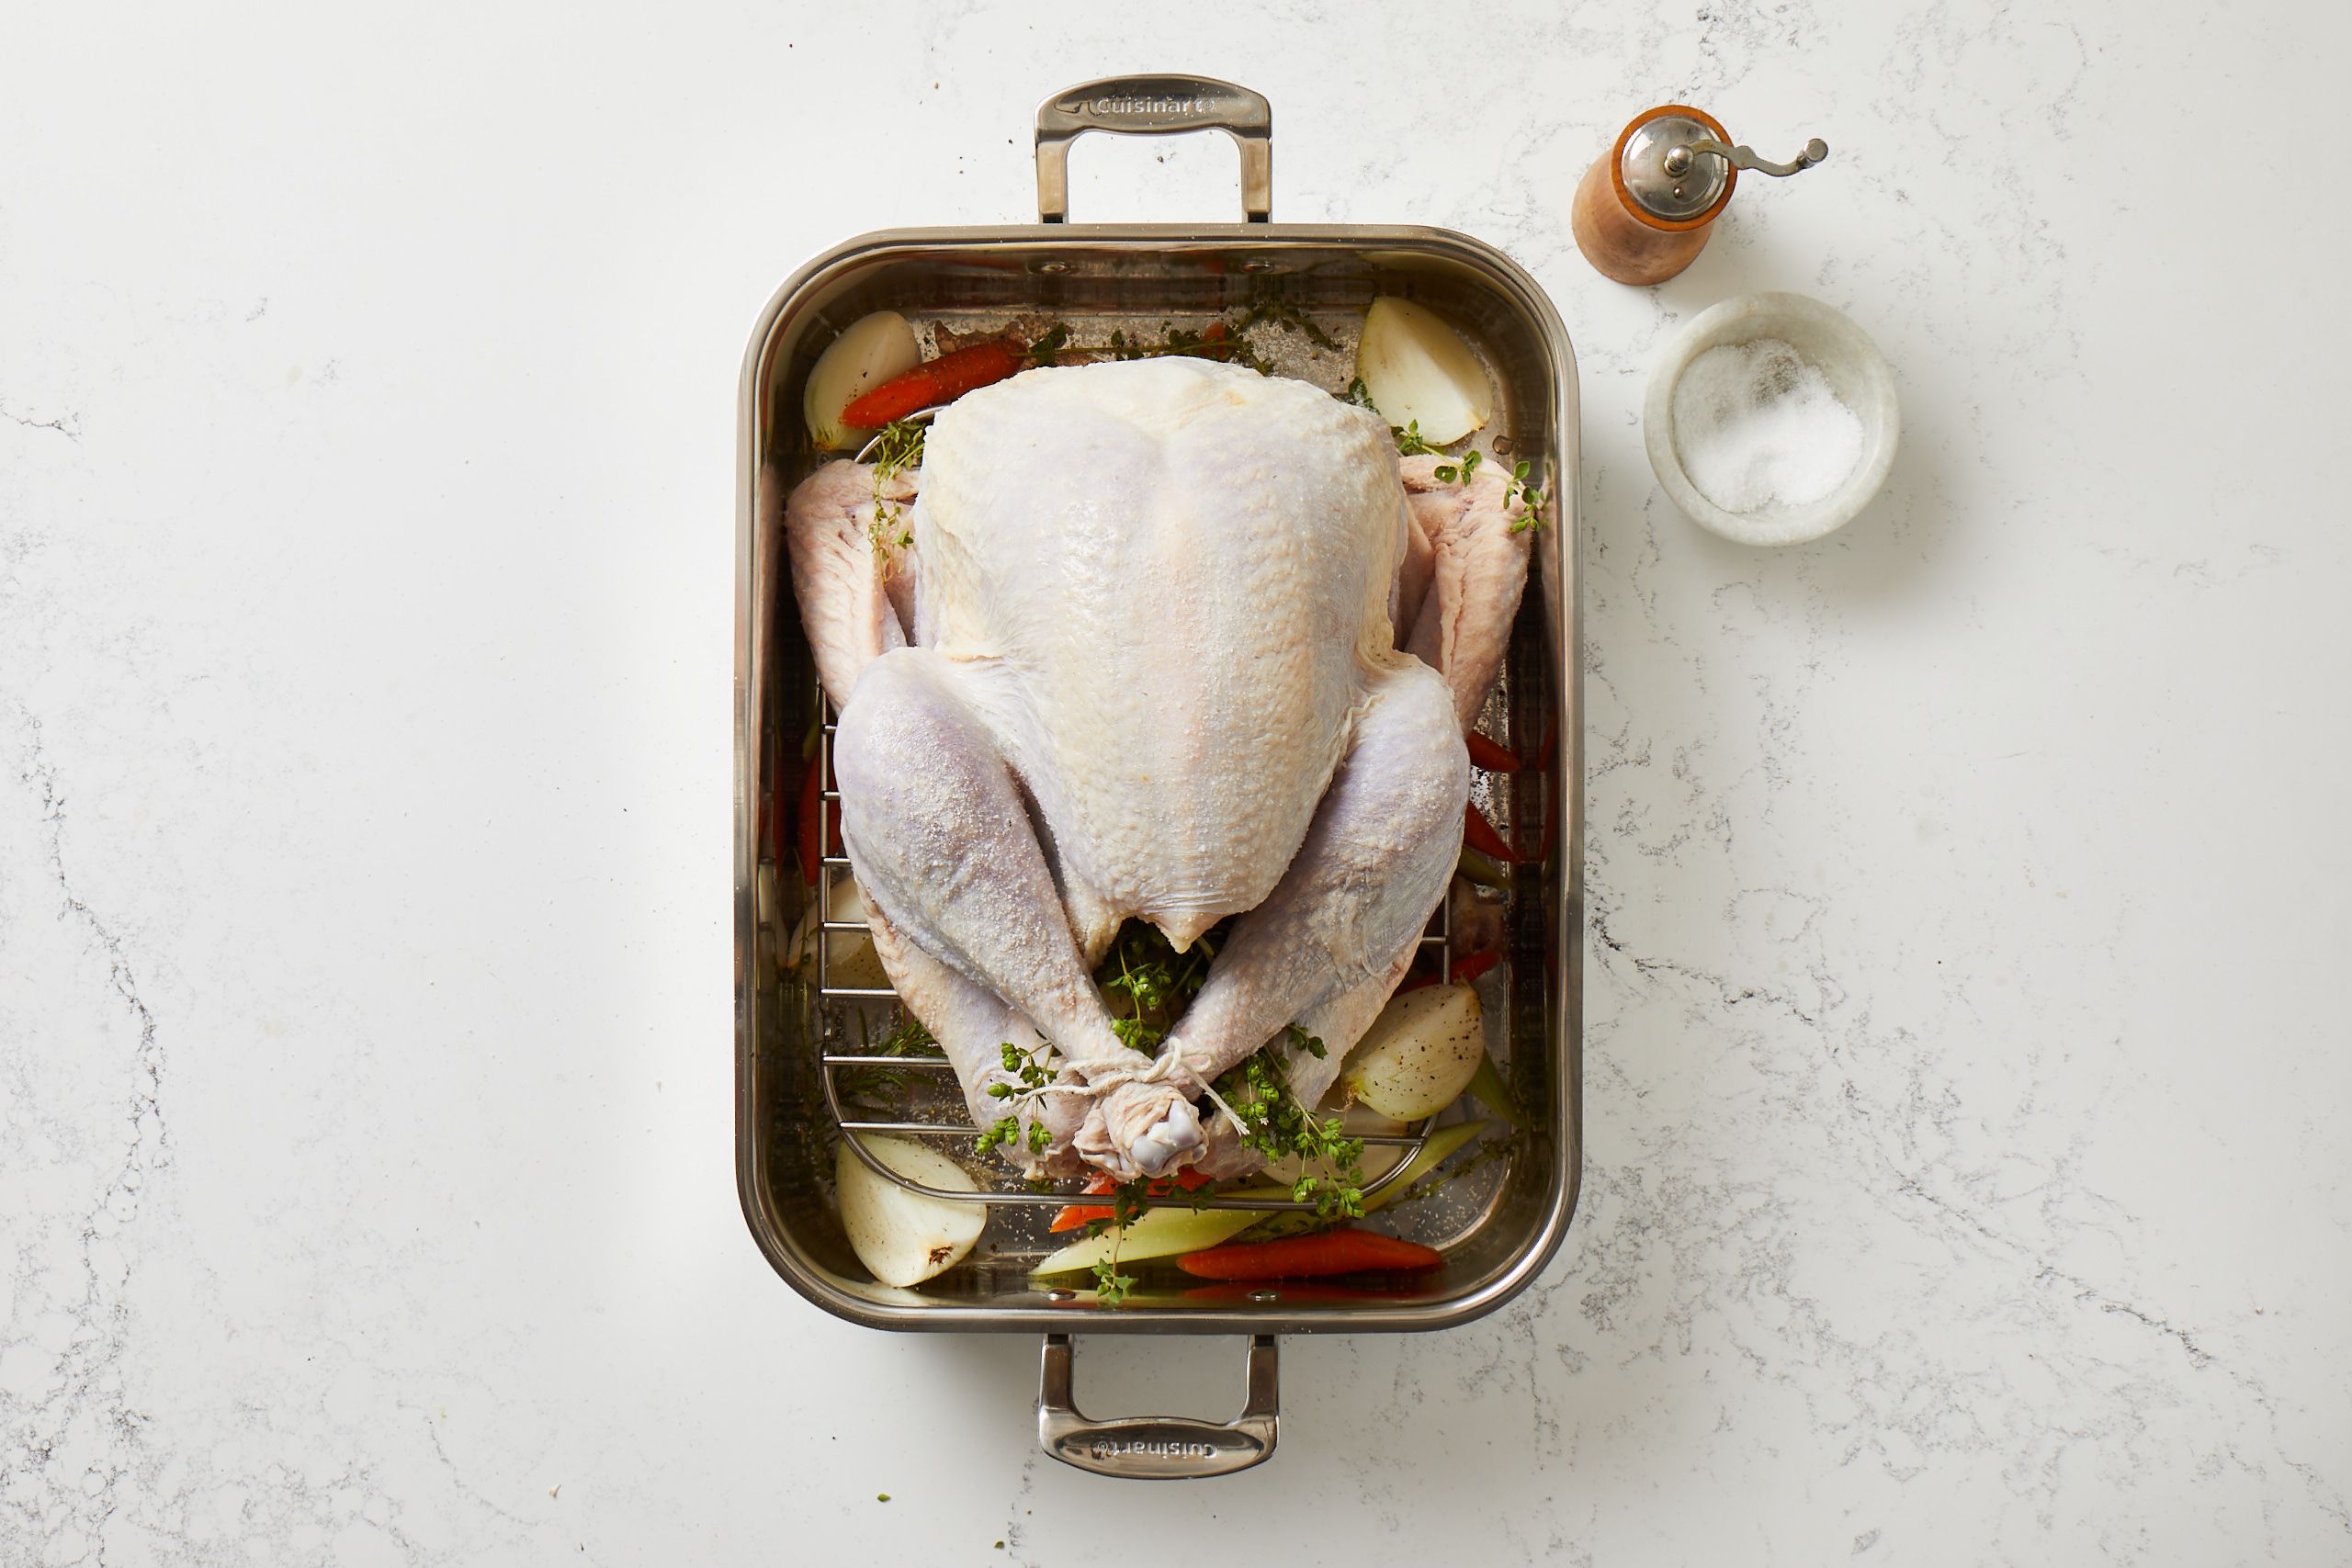 What Size Pan is Best for Your Turkey?